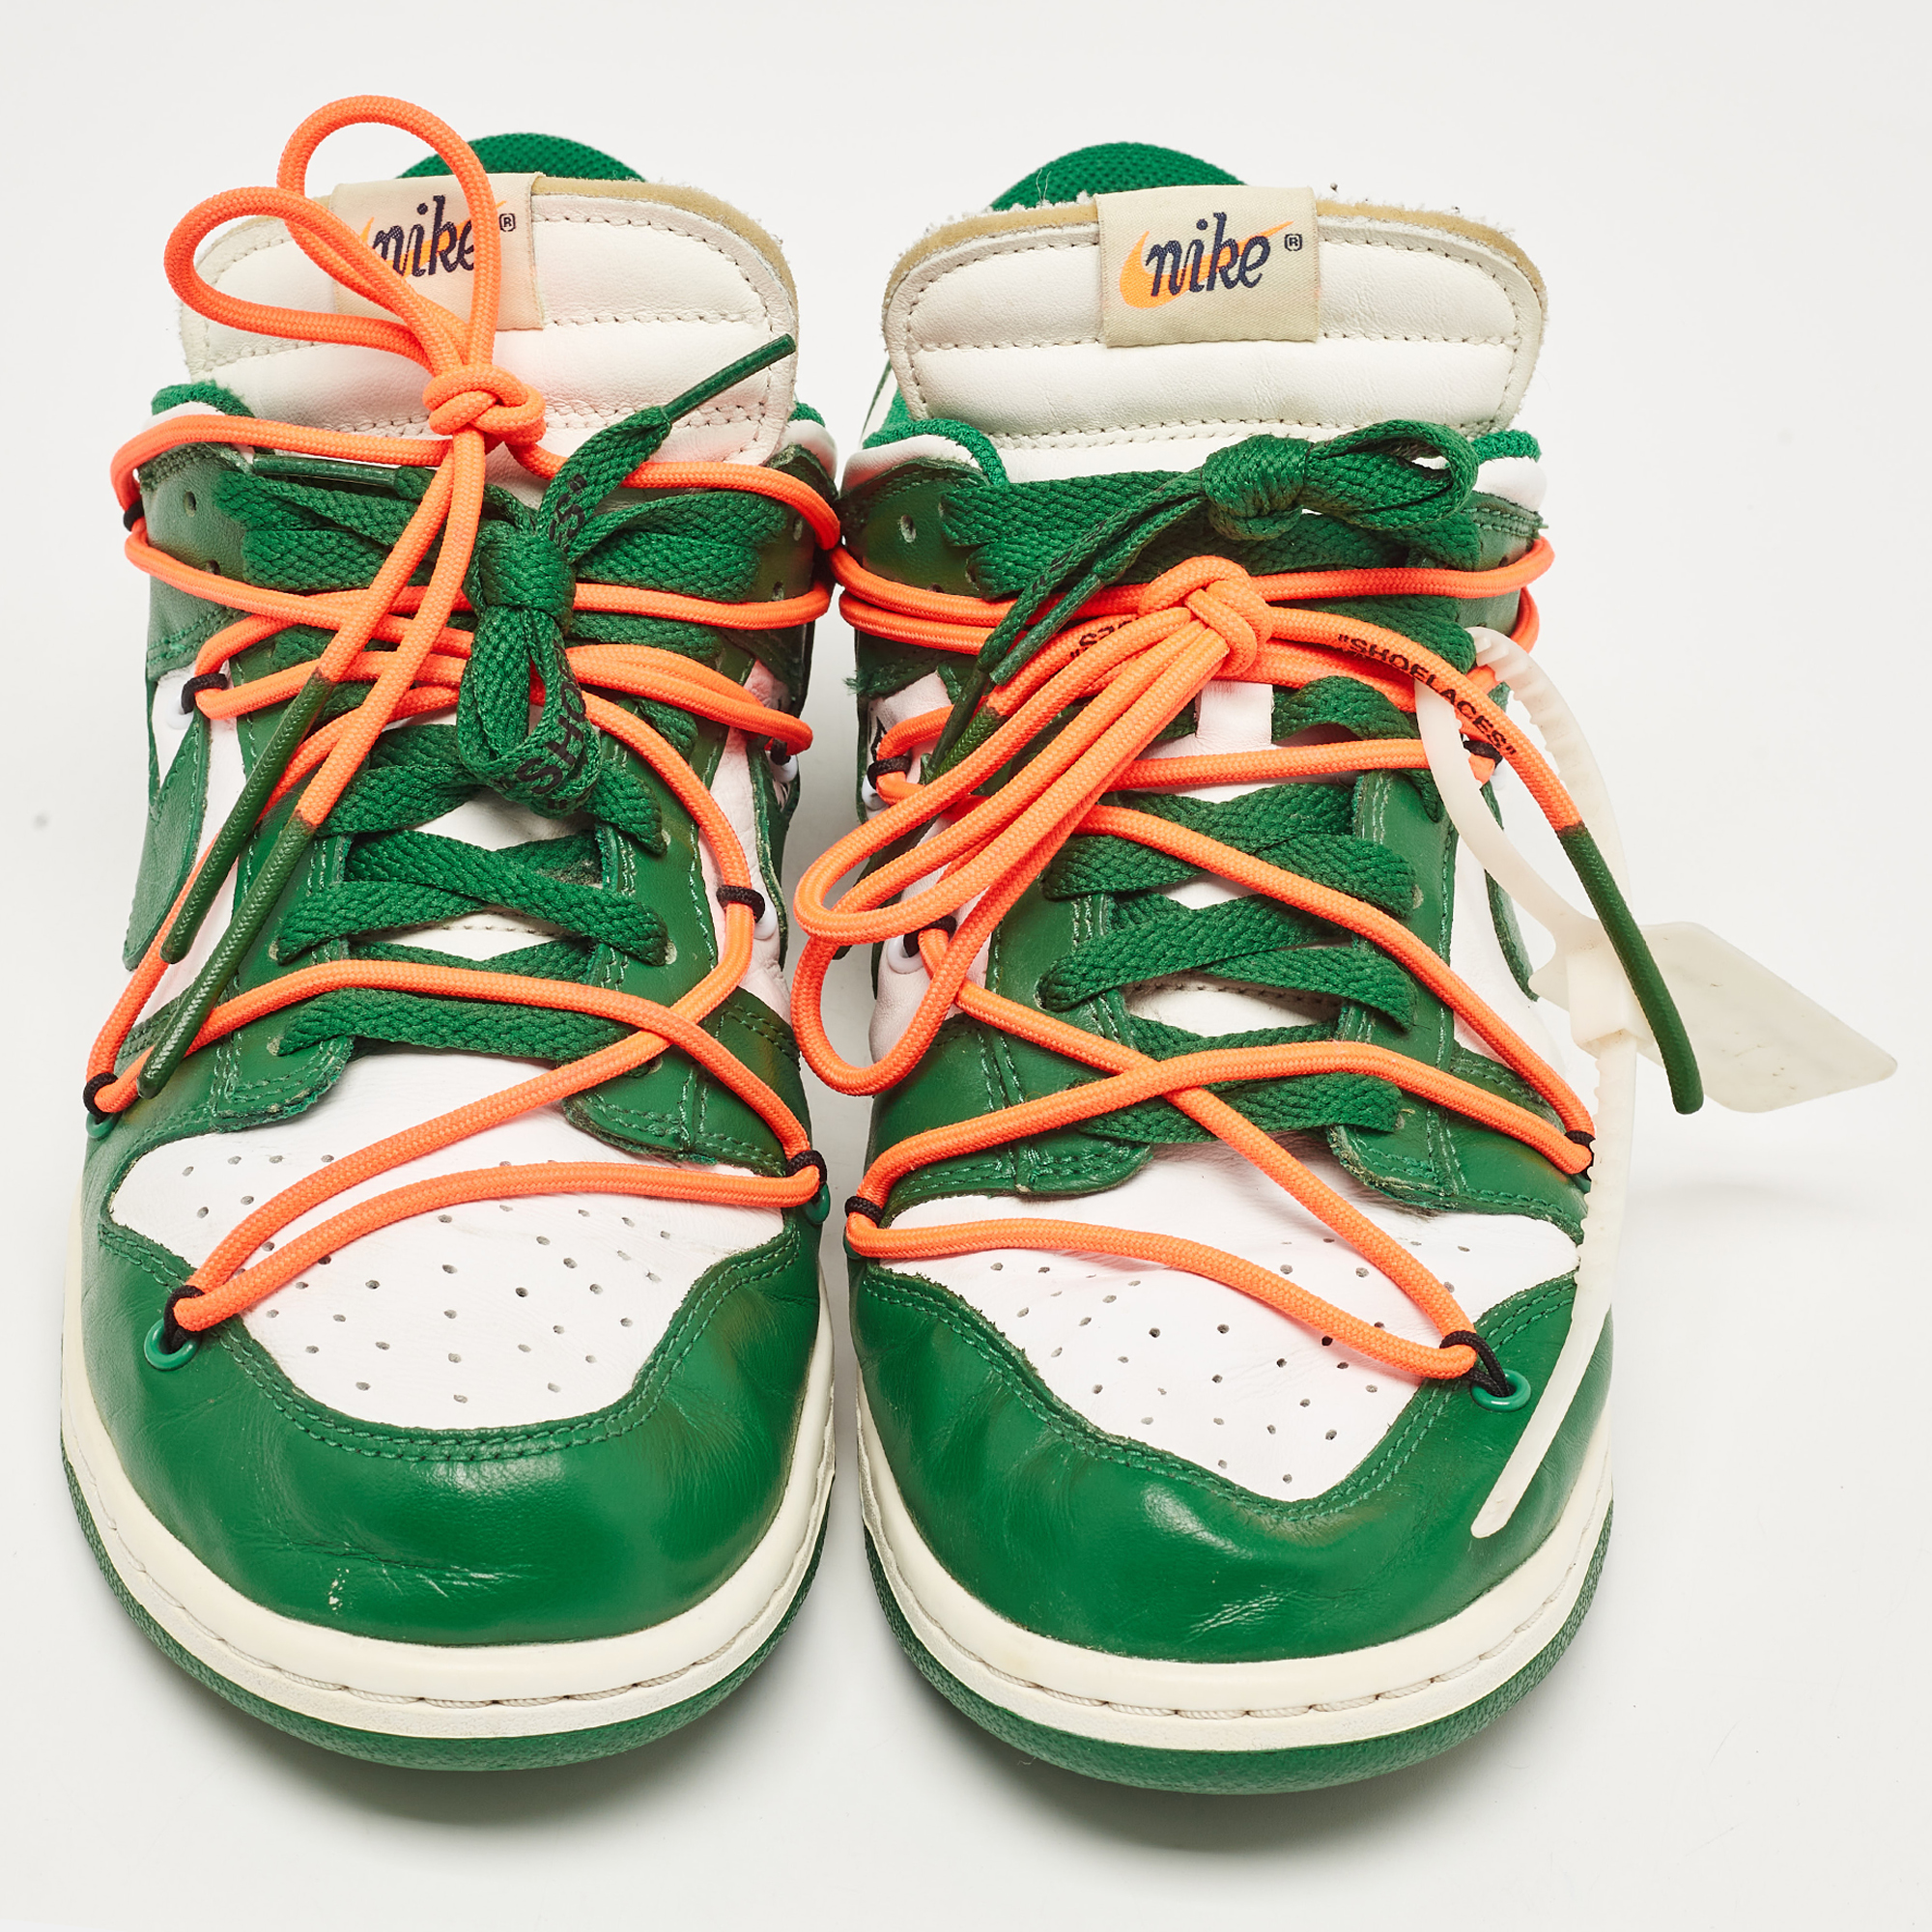 Off-White X Nike Green/White Leather Dunk Low Top Sneakers Size 42.5